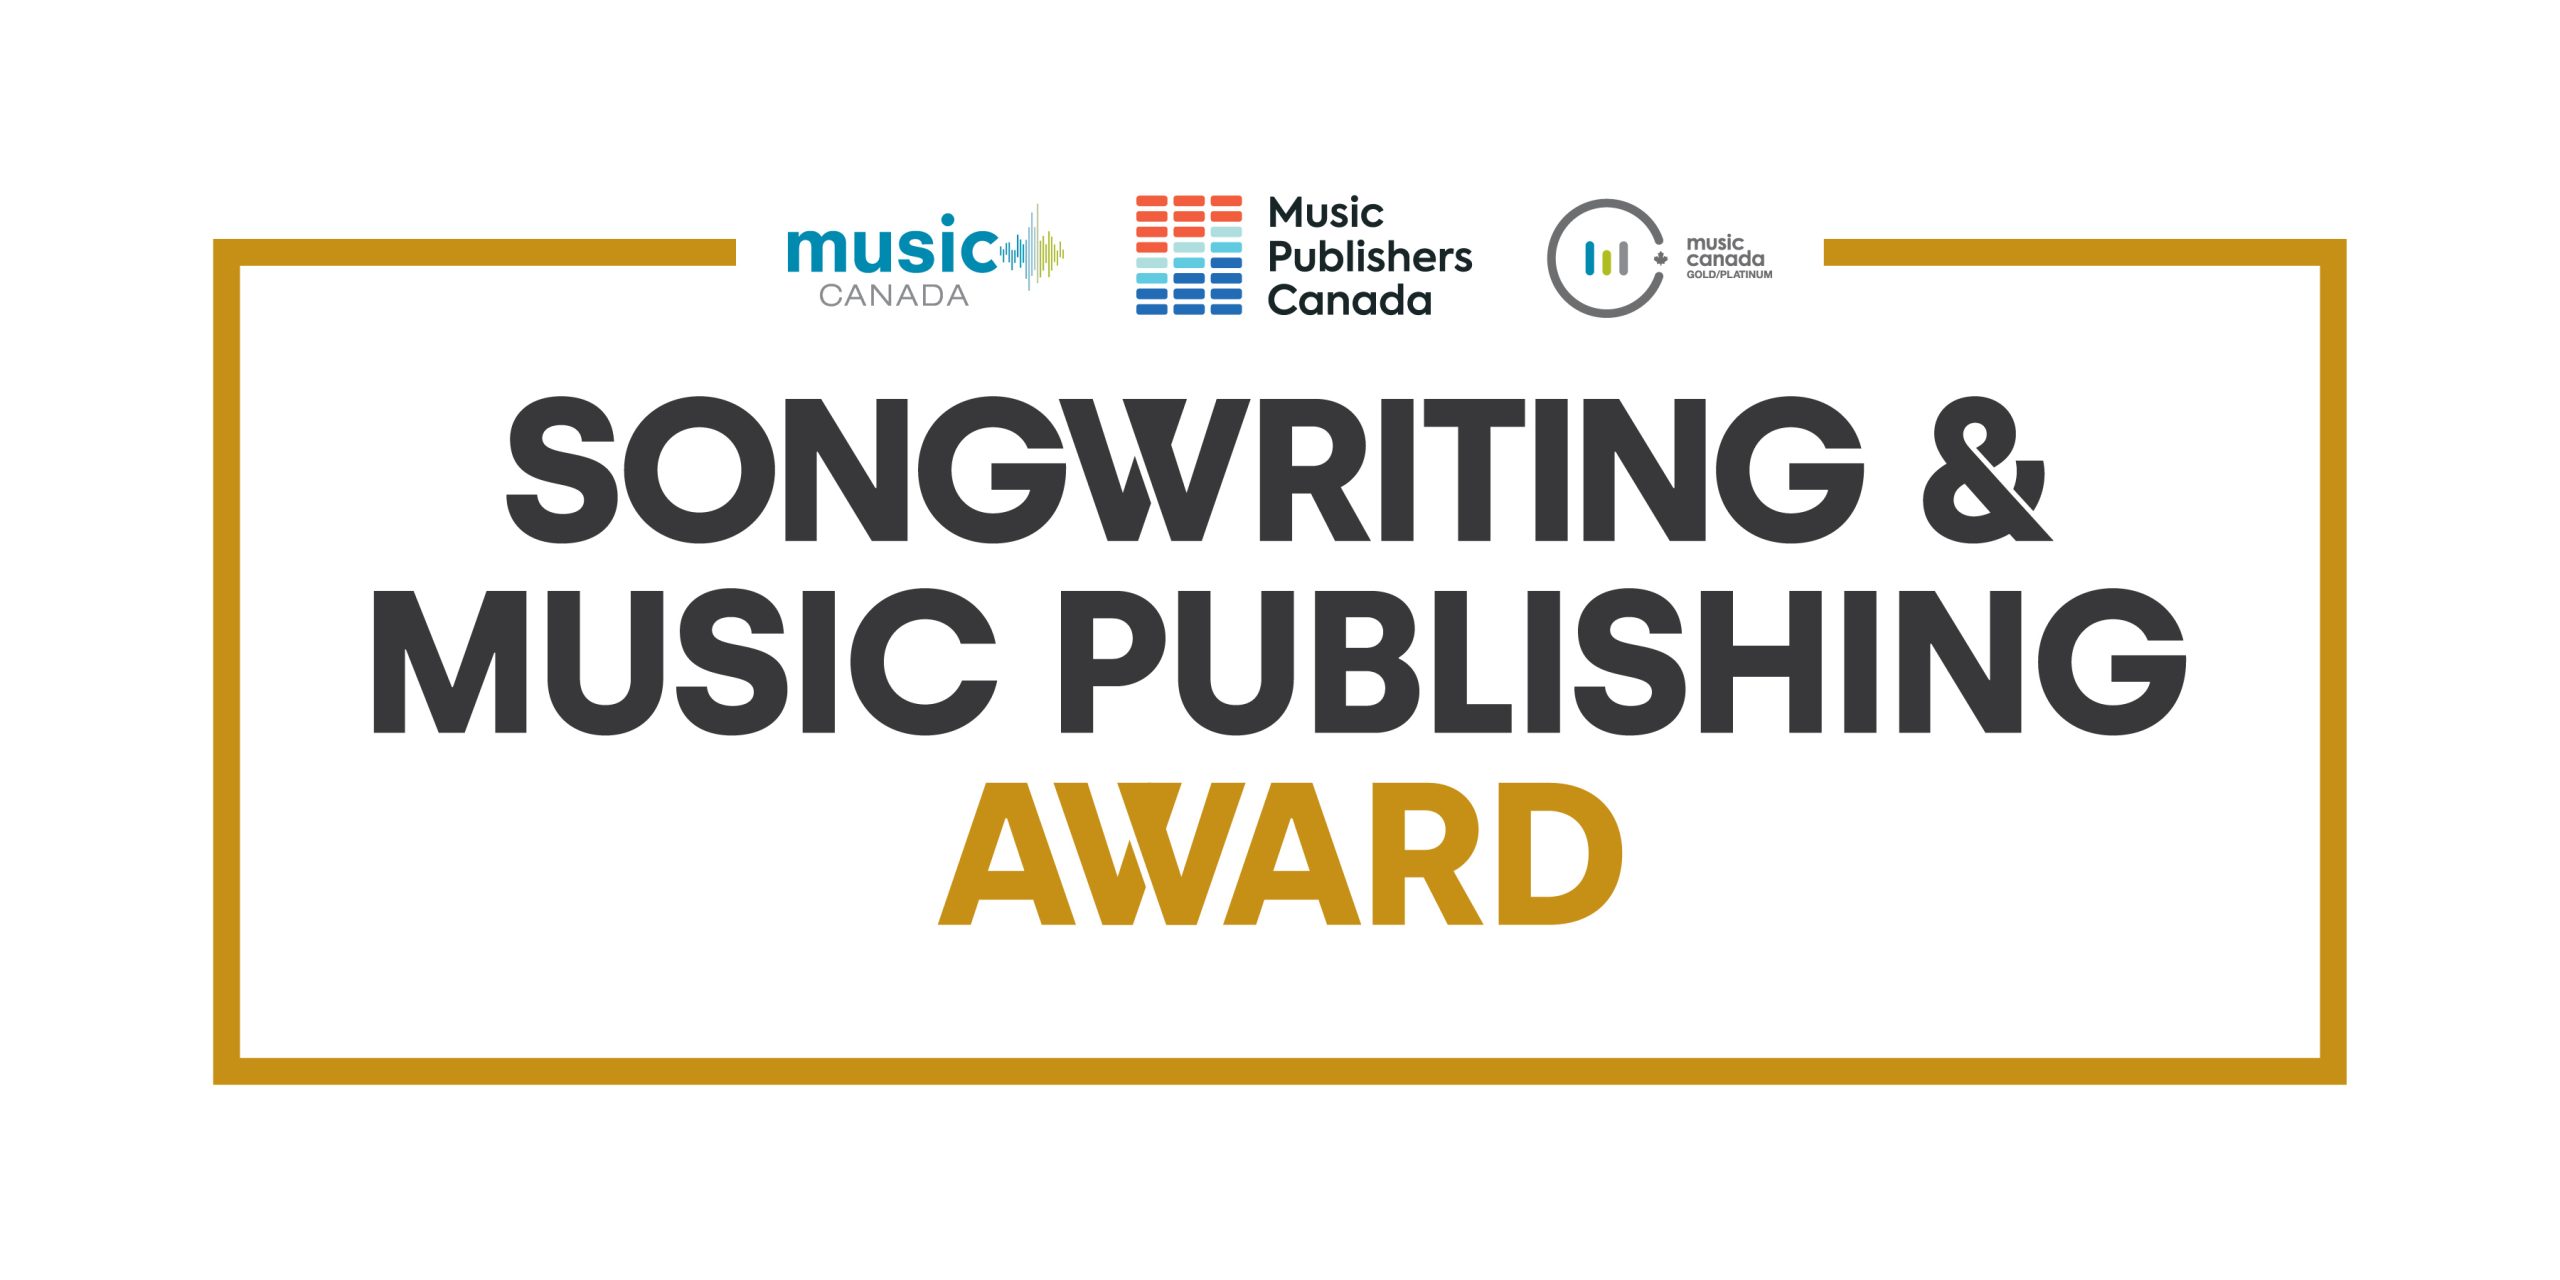 Audio Publishers Canada and Songs Canada launch new Songwriting and New music Publishing Award